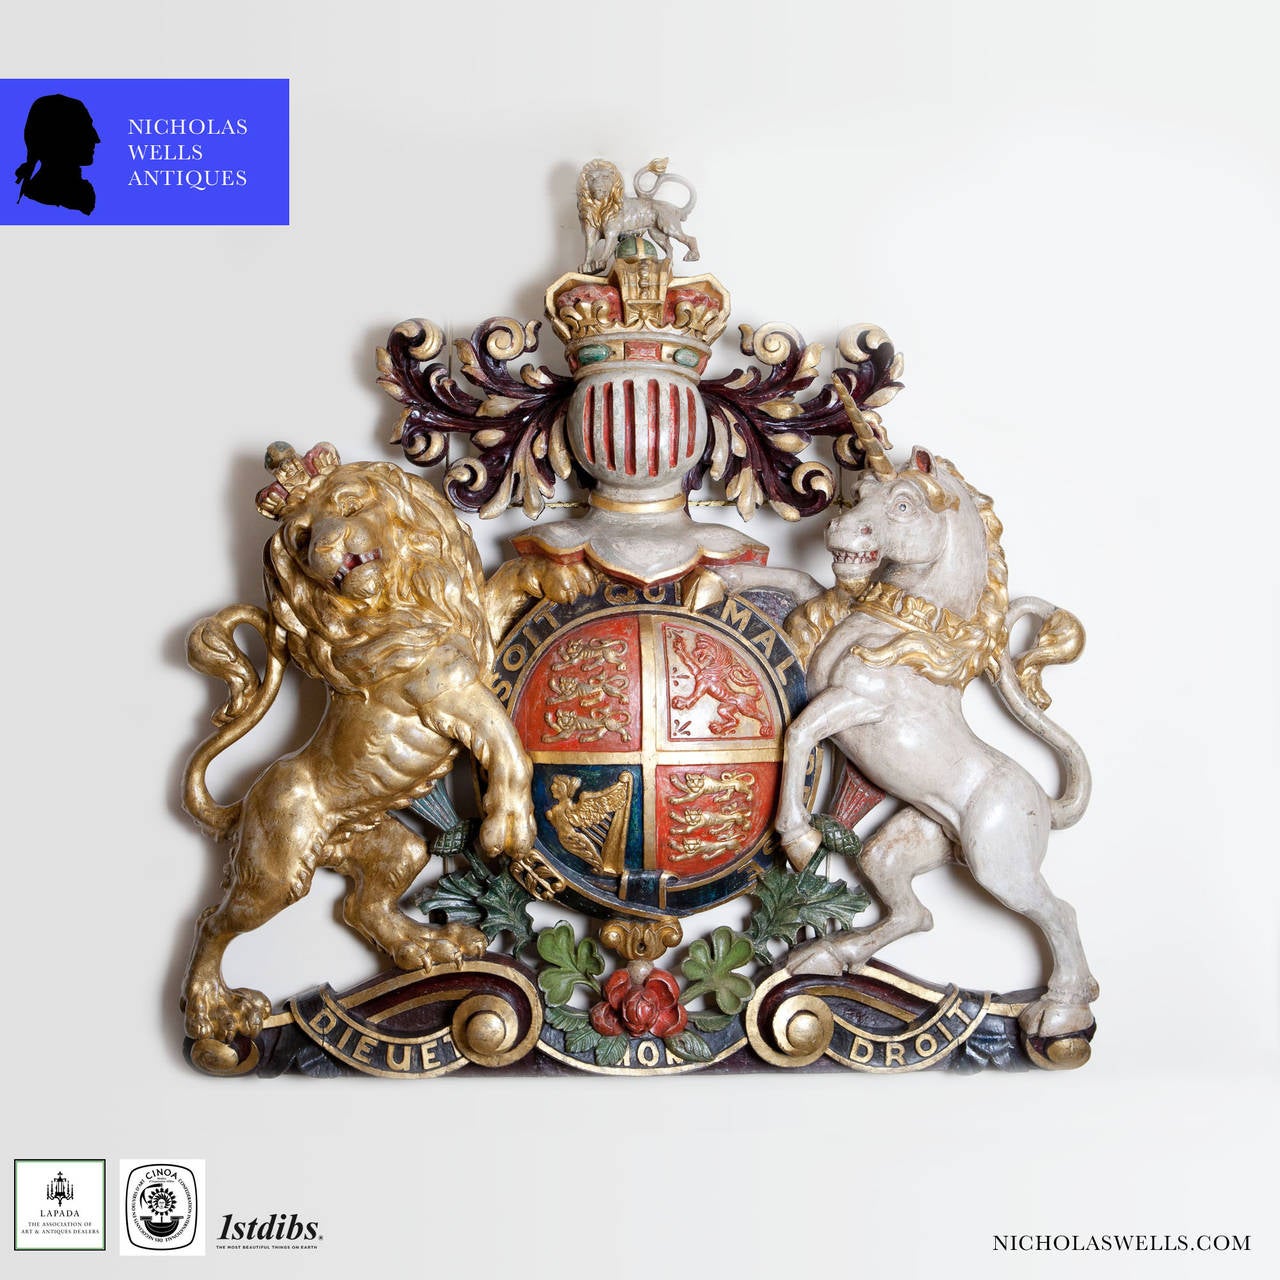 A large scale mid 20th century British Royal Coat of Arms, as used by Queen Elizabeth II from 1953.  

Dating from 1603, the Lion and the Unicorn are symbols of the United Kingdom. The lion symbolises England and the unicorn represents Scotland.